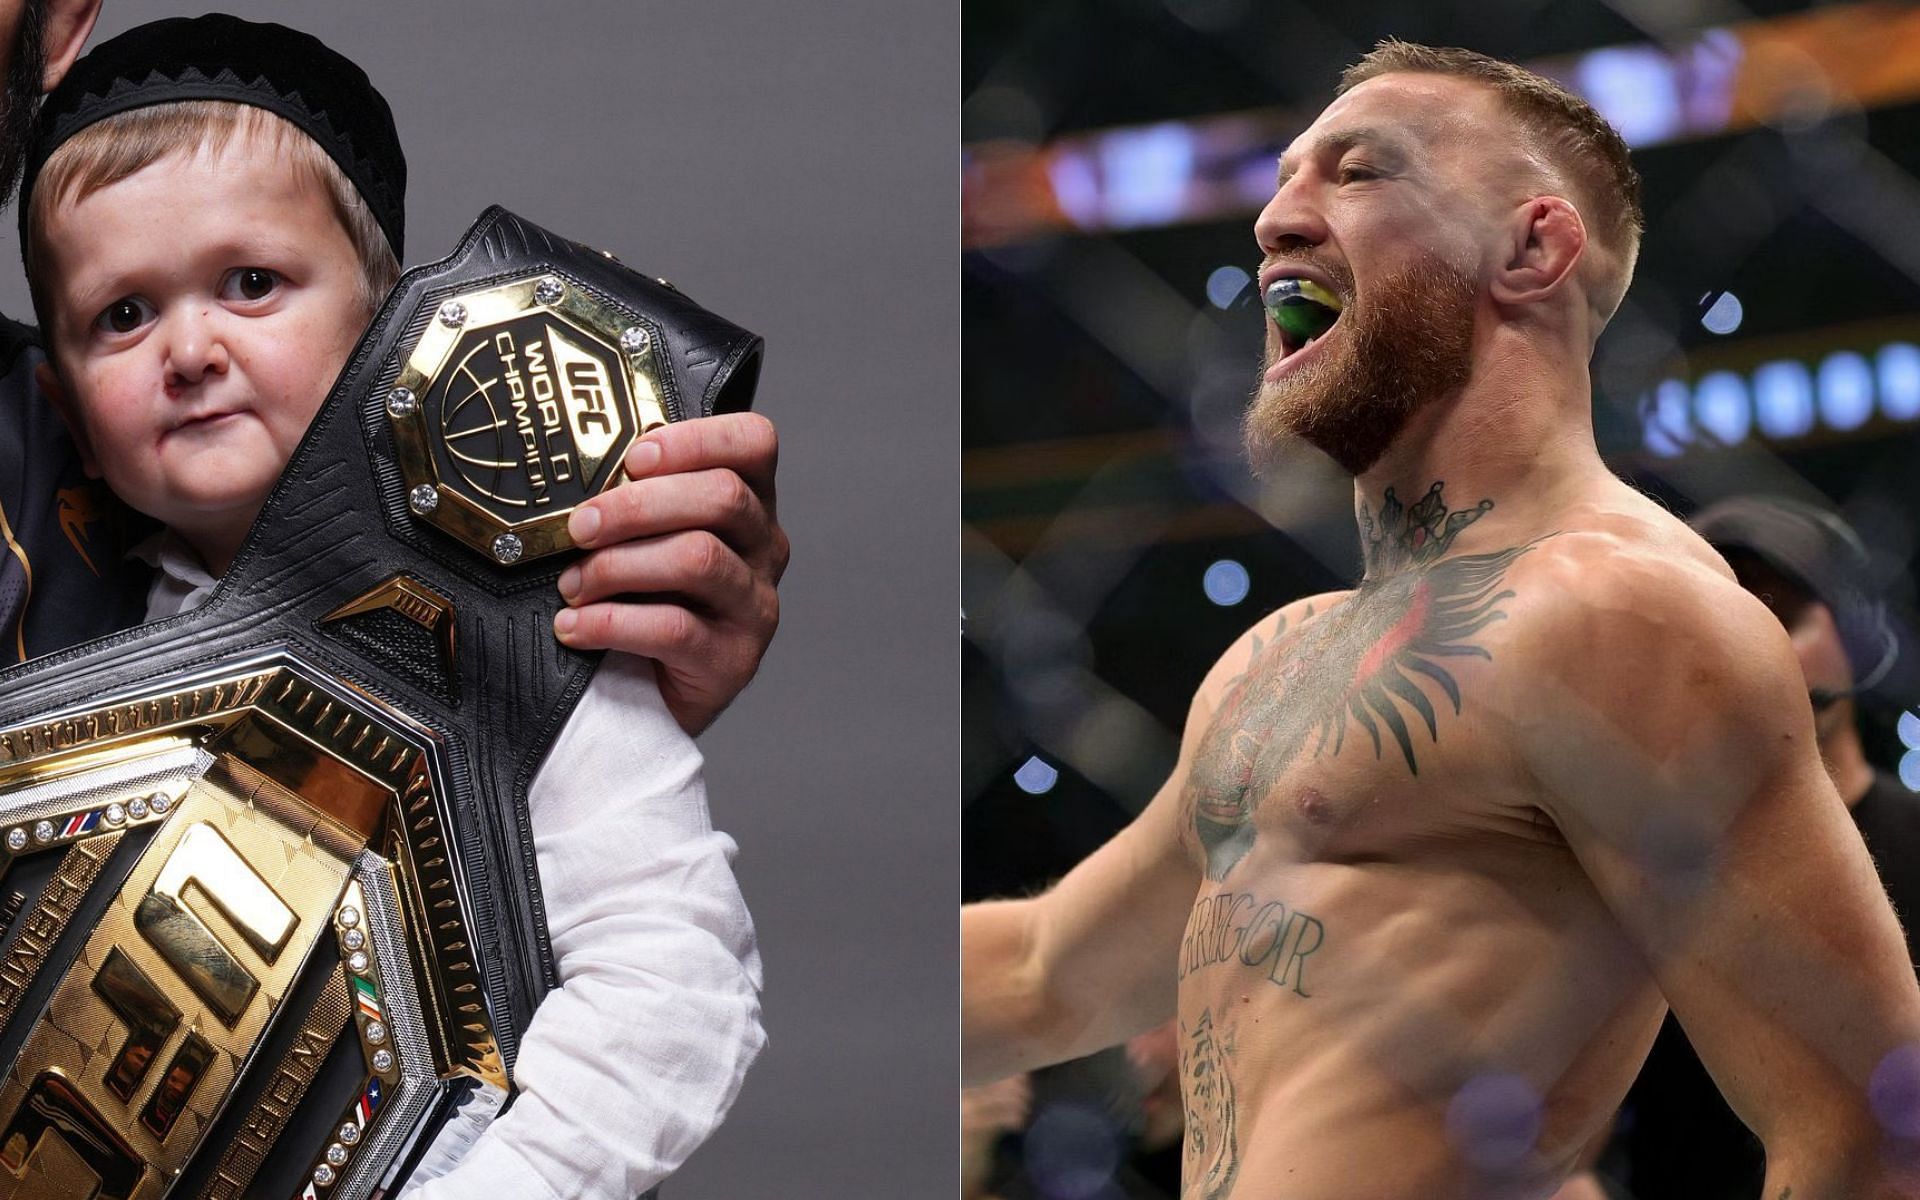 Hasbulla has reignited his feud with Conor McGregor [Image Credit: Getty and @HasbullaHive on Twitter]